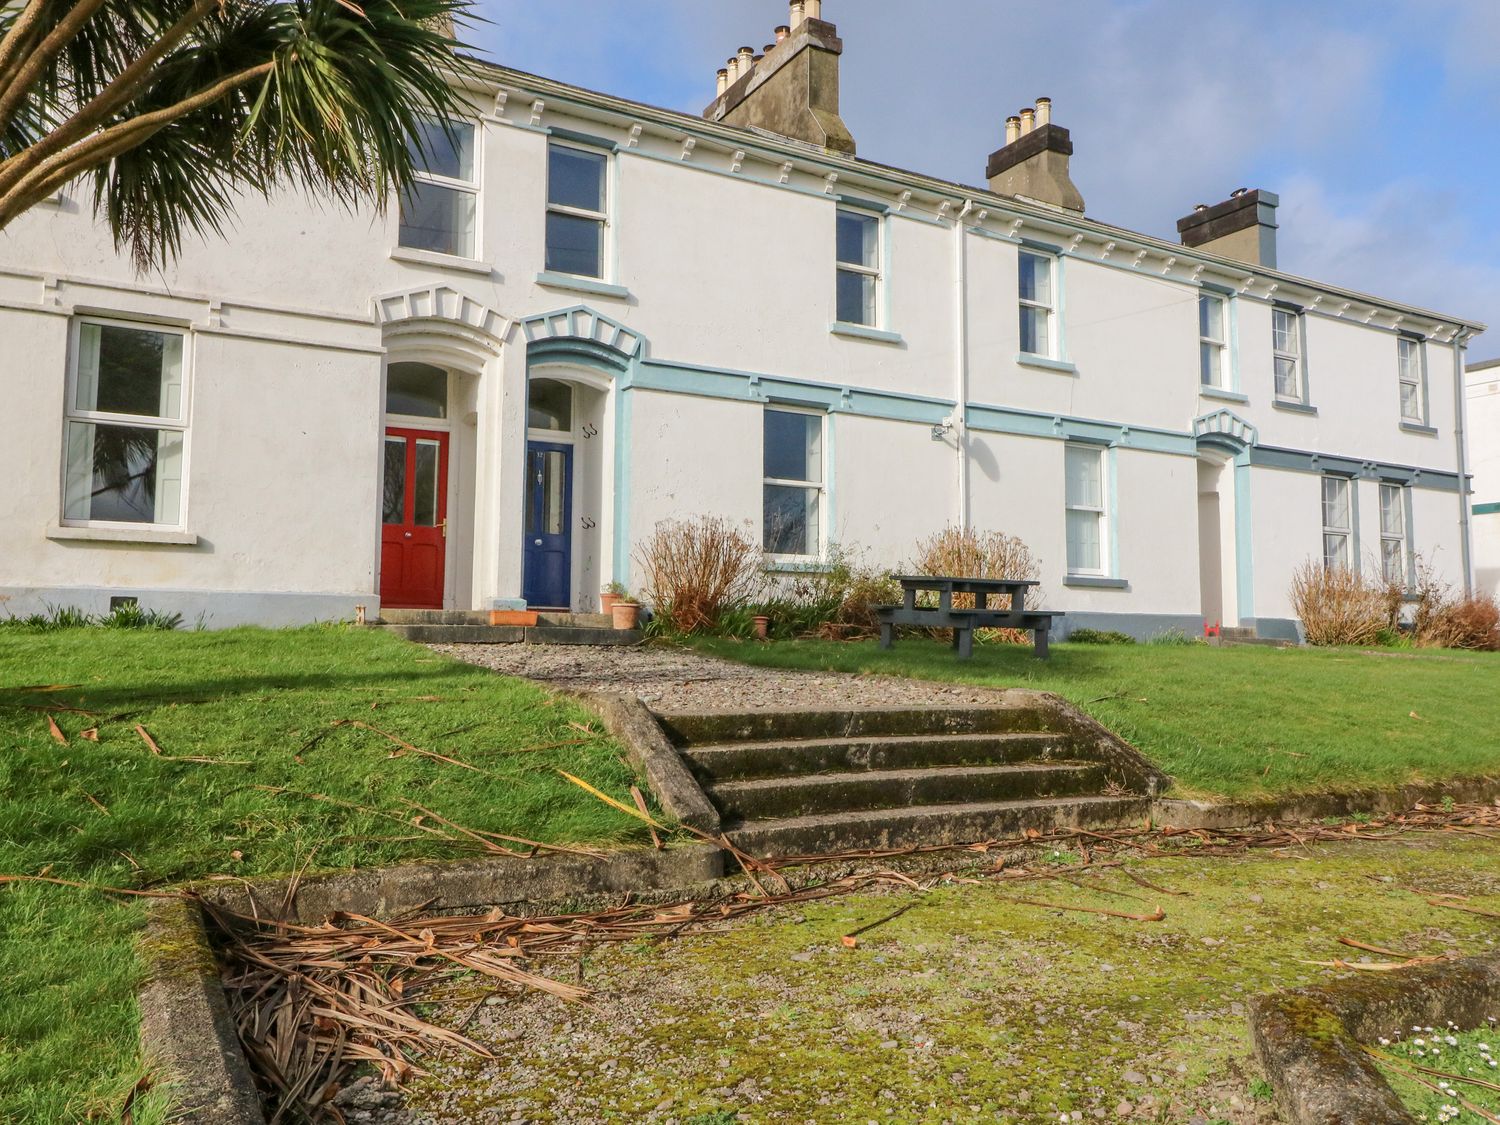 12 Cable Station Terrace - County Kerry - 1128639 - photo 1